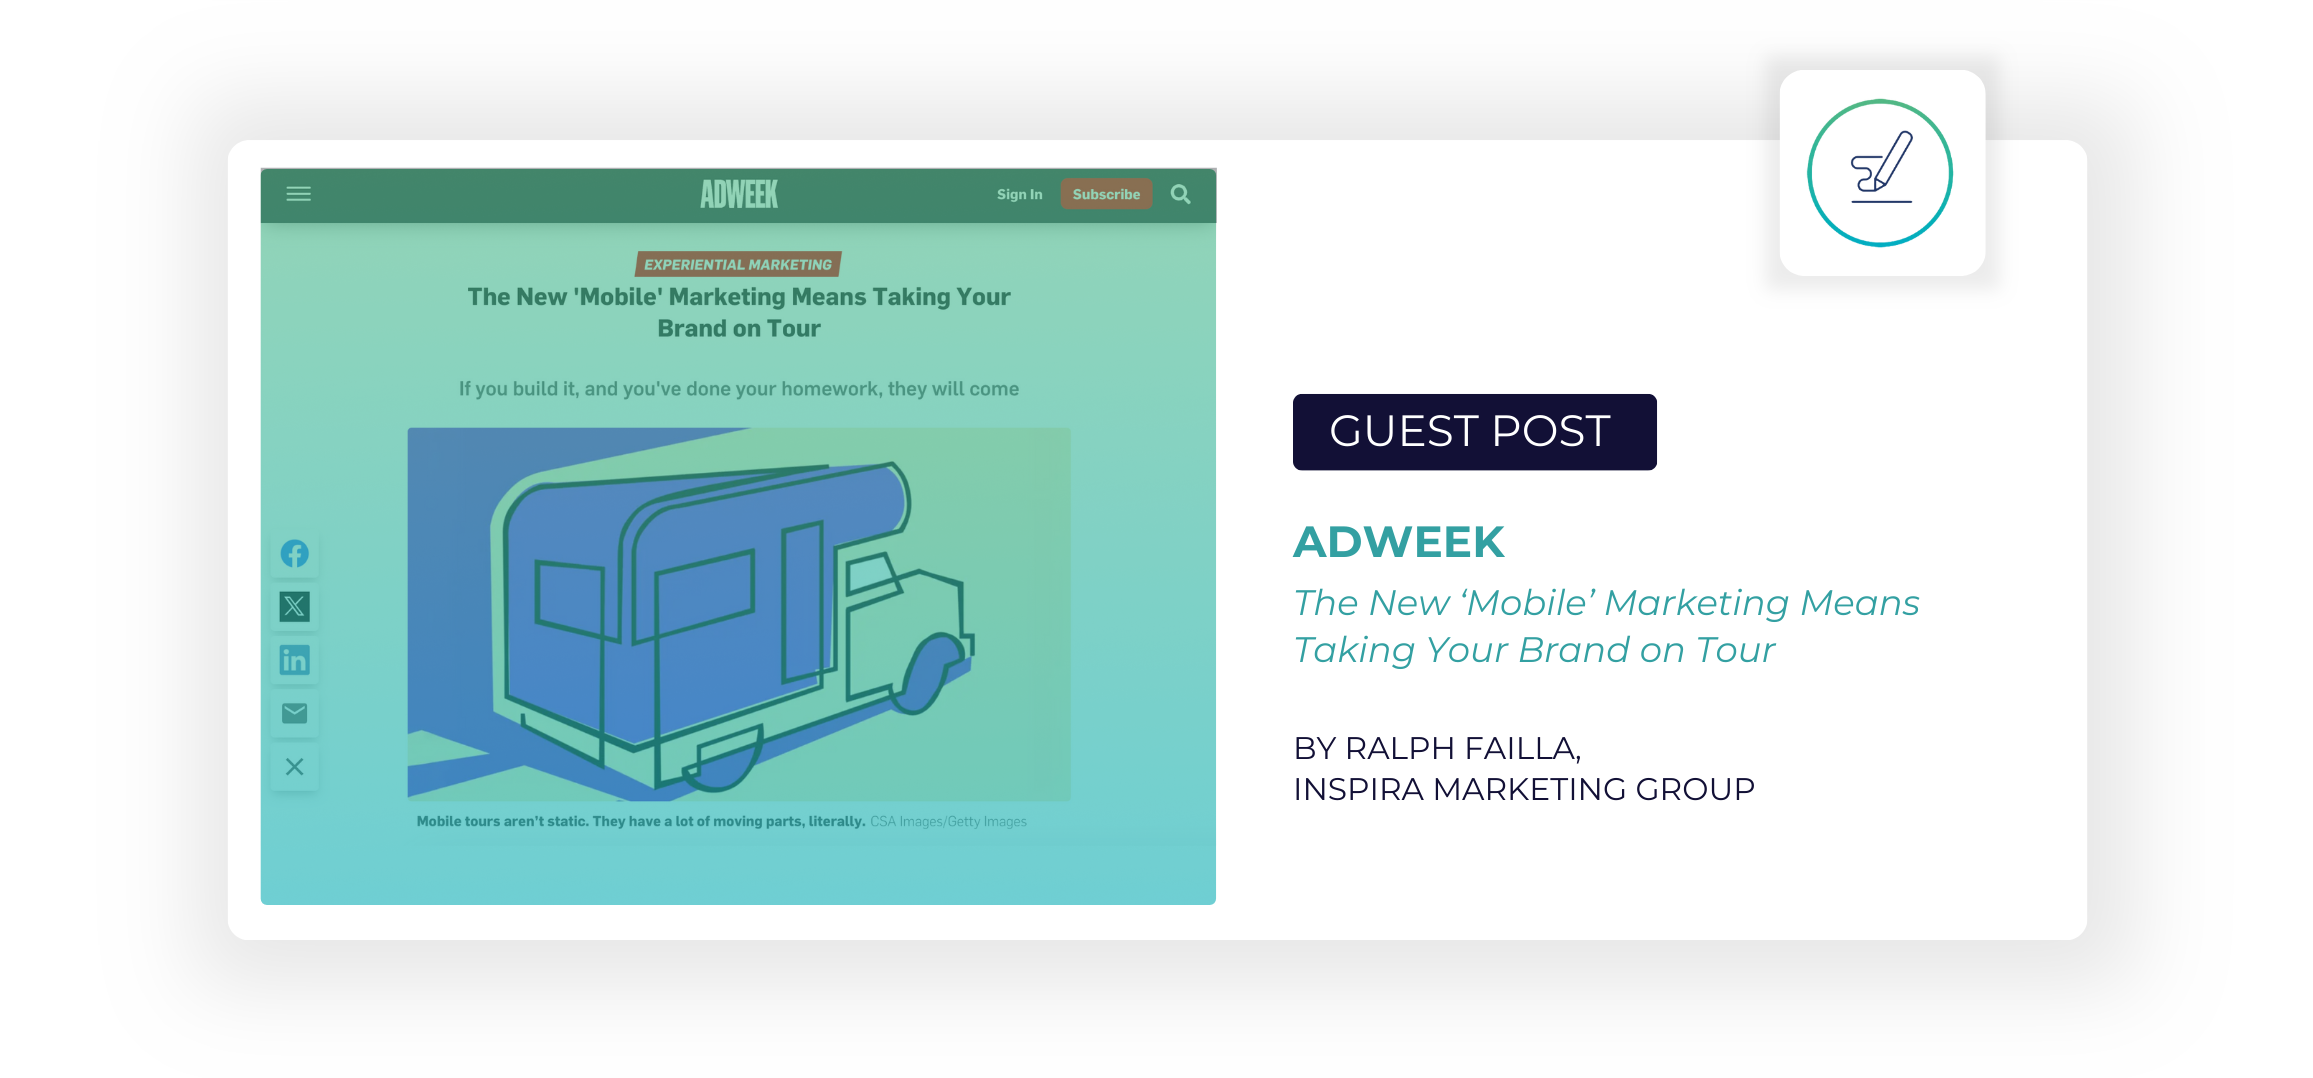 Guest post in Adweek by Ralph Failla of Inspira Marketing Group: The New 'Mobile' Marketing Means Taking Your Brand on Tour